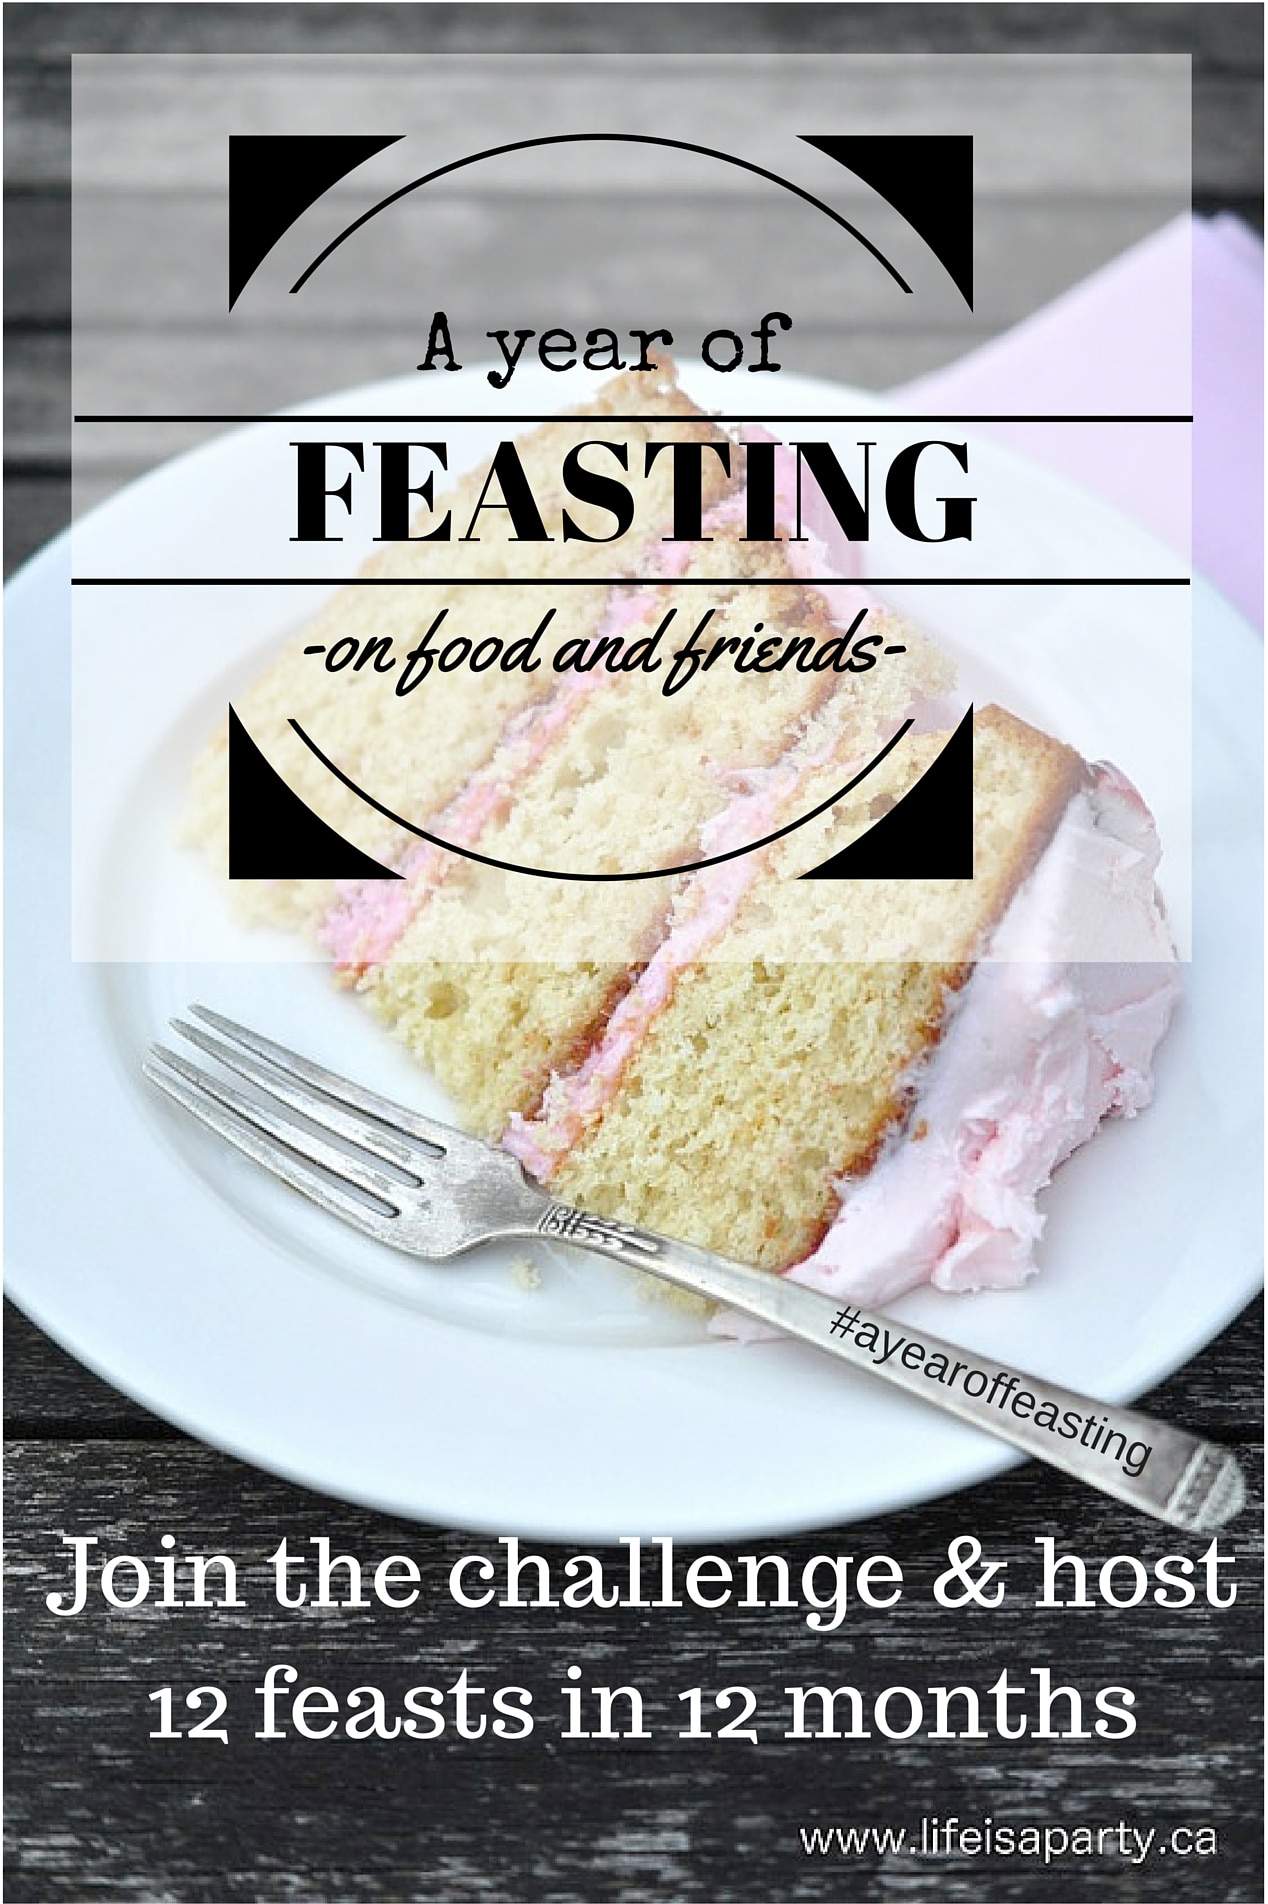 A Year of Feasting Challenge -12 feasts in 12 months